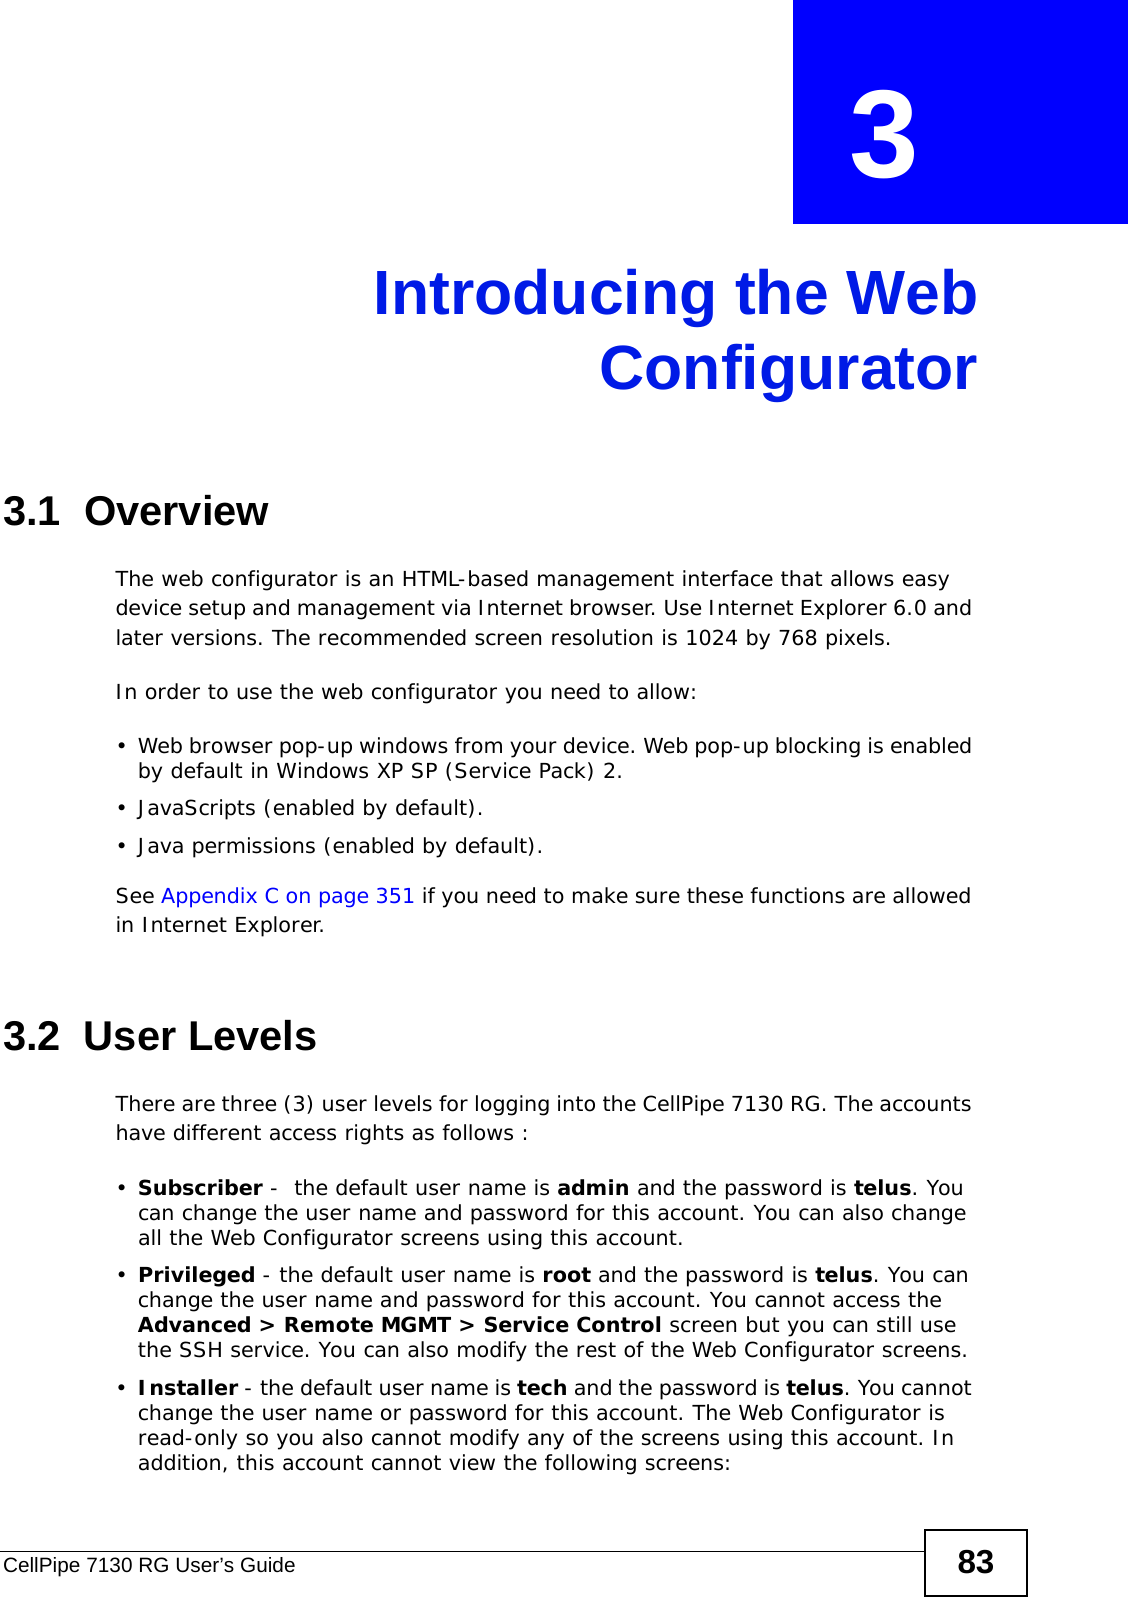 CellPipe 7130 RG User’s Guide 83CHAPTER  3 Introducing the WebConfigurator3.1  OverviewThe web configurator is an HTML-based management interface that allows easy device setup and management via Internet browser. Use Internet Explorer 6.0 and later versions. The recommended screen resolution is 1024 by 768 pixels.In order to use the web configurator you need to allow:• Web browser pop-up windows from your device. Web pop-up blocking is enabled by default in Windows XP SP (Service Pack) 2.• JavaScripts (enabled by default).• Java permissions (enabled by default).See Appendix C on page 351 if you need to make sure these functions are allowed in Internet Explorer.3.2  User LevelsThere are three (3) user levels for logging into the CellPipe 7130 RG. The accounts have different access rights as follows : •Subscriber -  the default user name is admin and the password is telus. You can change the user name and password for this account. You can also change all the Web Configurator screens using this account.•Privileged - the default user name is root and the password is telus. You can change the user name and password for this account. You cannot access the Advanced &gt; Remote MGMT &gt; Service Control screen but you can still use the SSH service. You can also modify the rest of the Web Configurator screens. •Installer - the default user name is tech and the password is telus. You cannot change the user name or password for this account. The Web Configurator is read-only so you also cannot modify any of the screens using this account. In addition, this account cannot view the following screens: